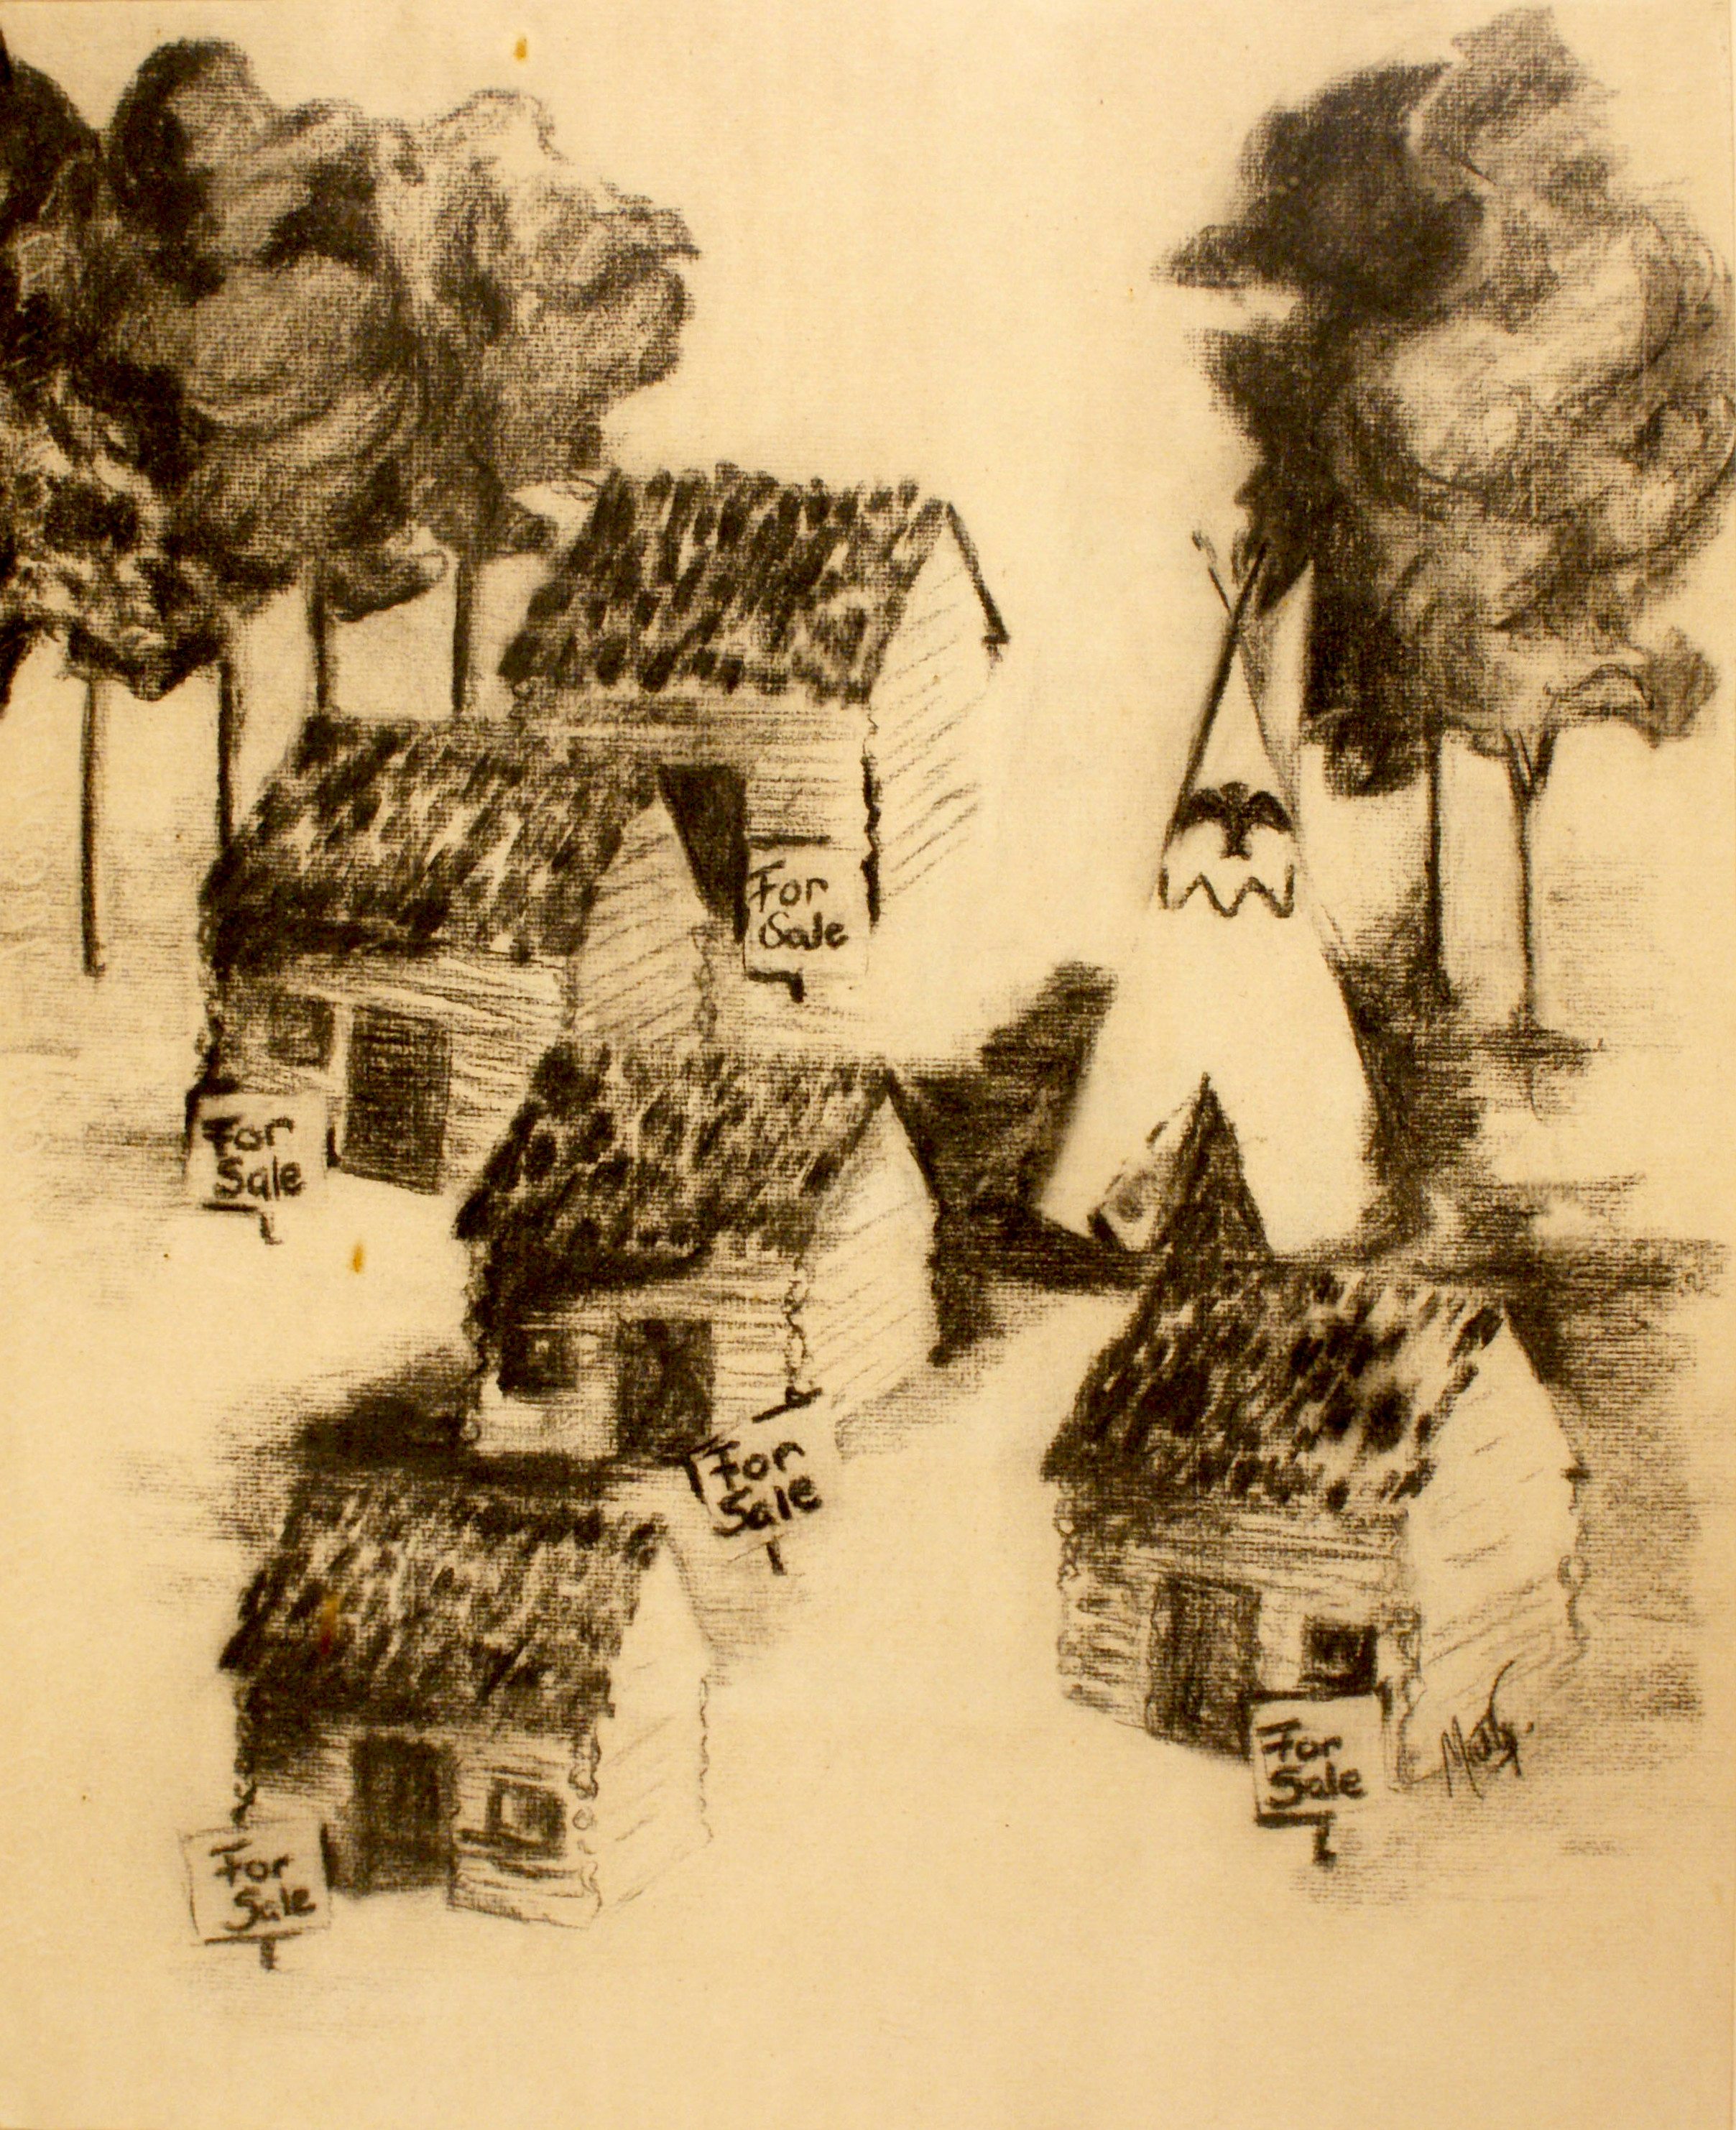 Changing Neighborhoods, 1960–1975 by Marty. Charcoal on paper. PJ2008.0254